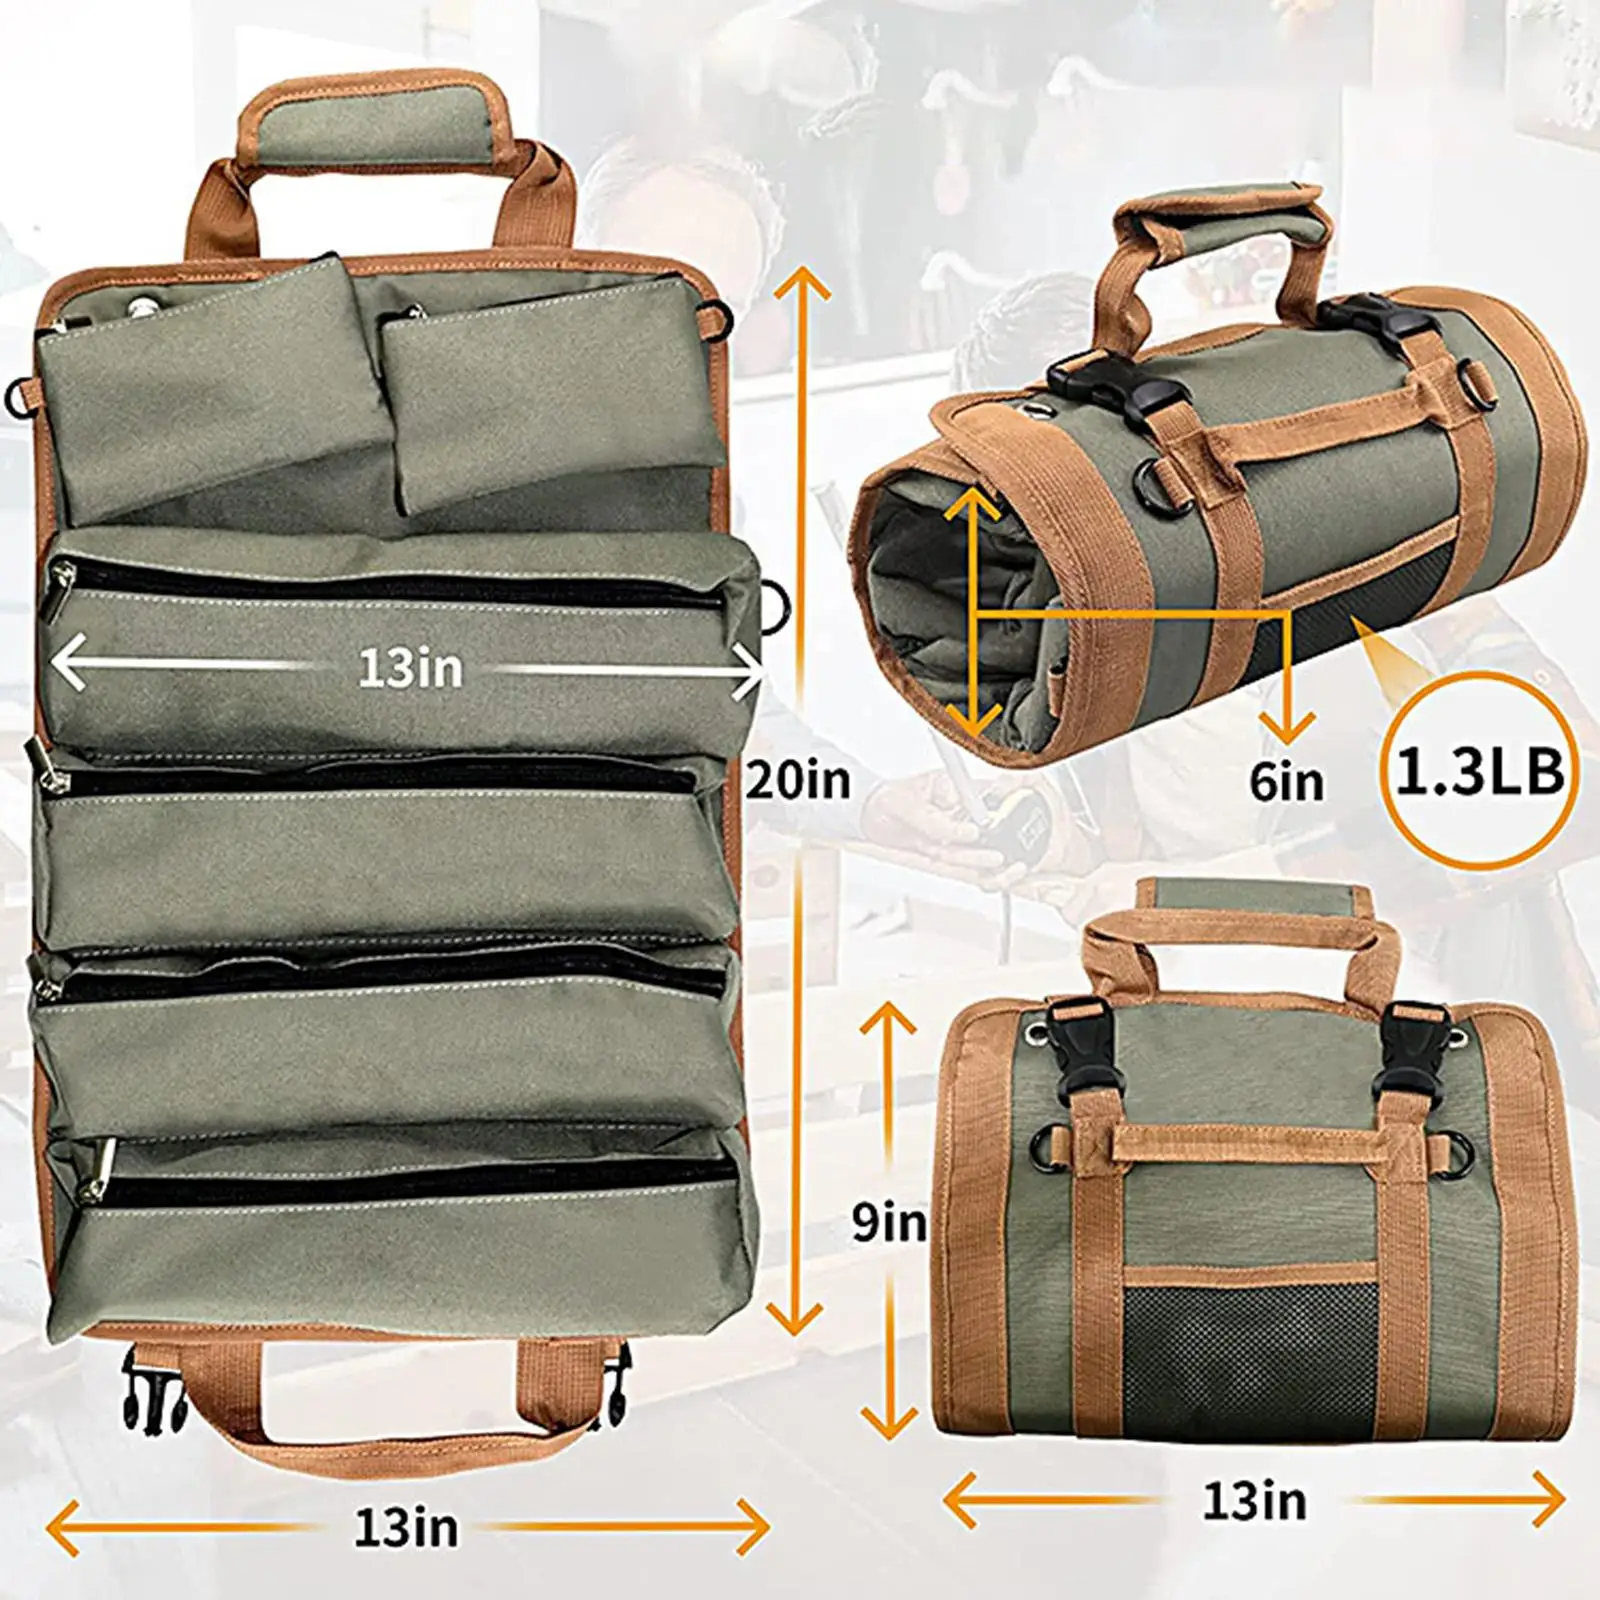 Tool Bag Roll up Small Tool Bag Case Maintenance Tool Bag Versatile Organizer Lightweight Storage for Camping Father Gifts